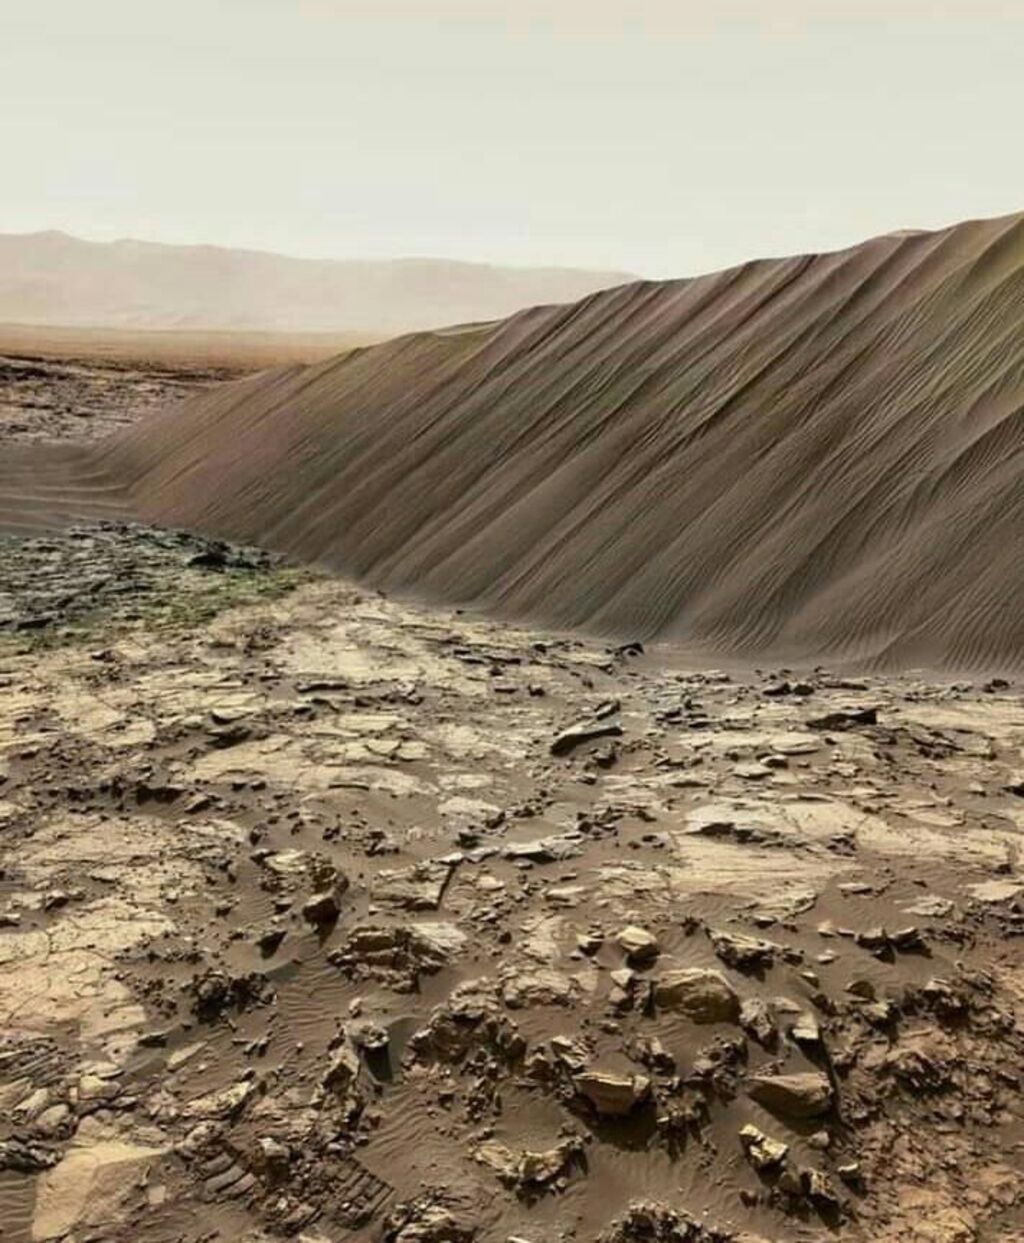 Rocky surface of Mars